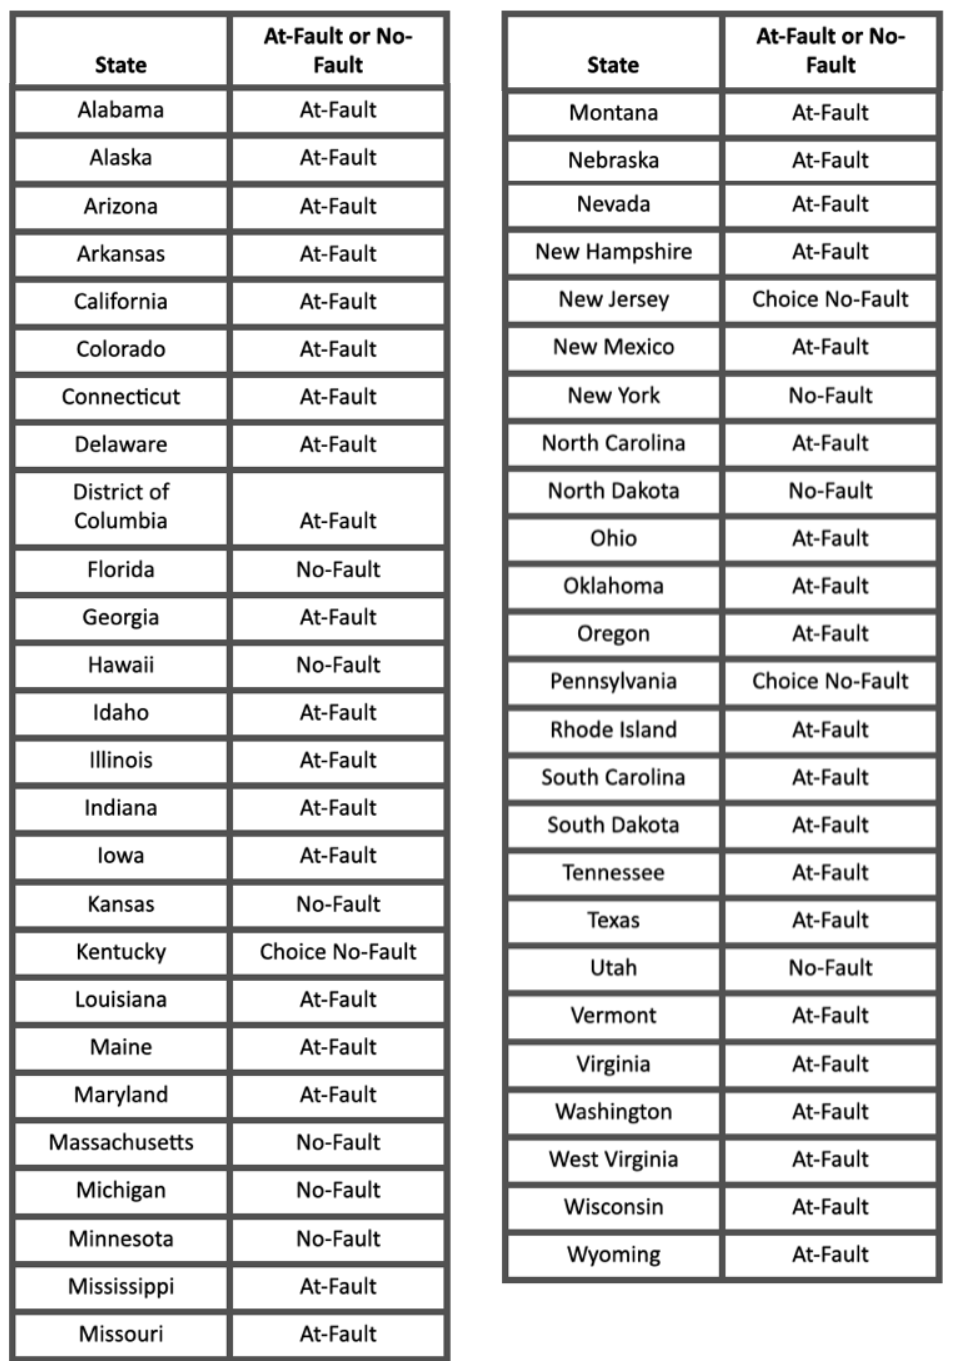 At-Fault and No-Fault states; table by author.